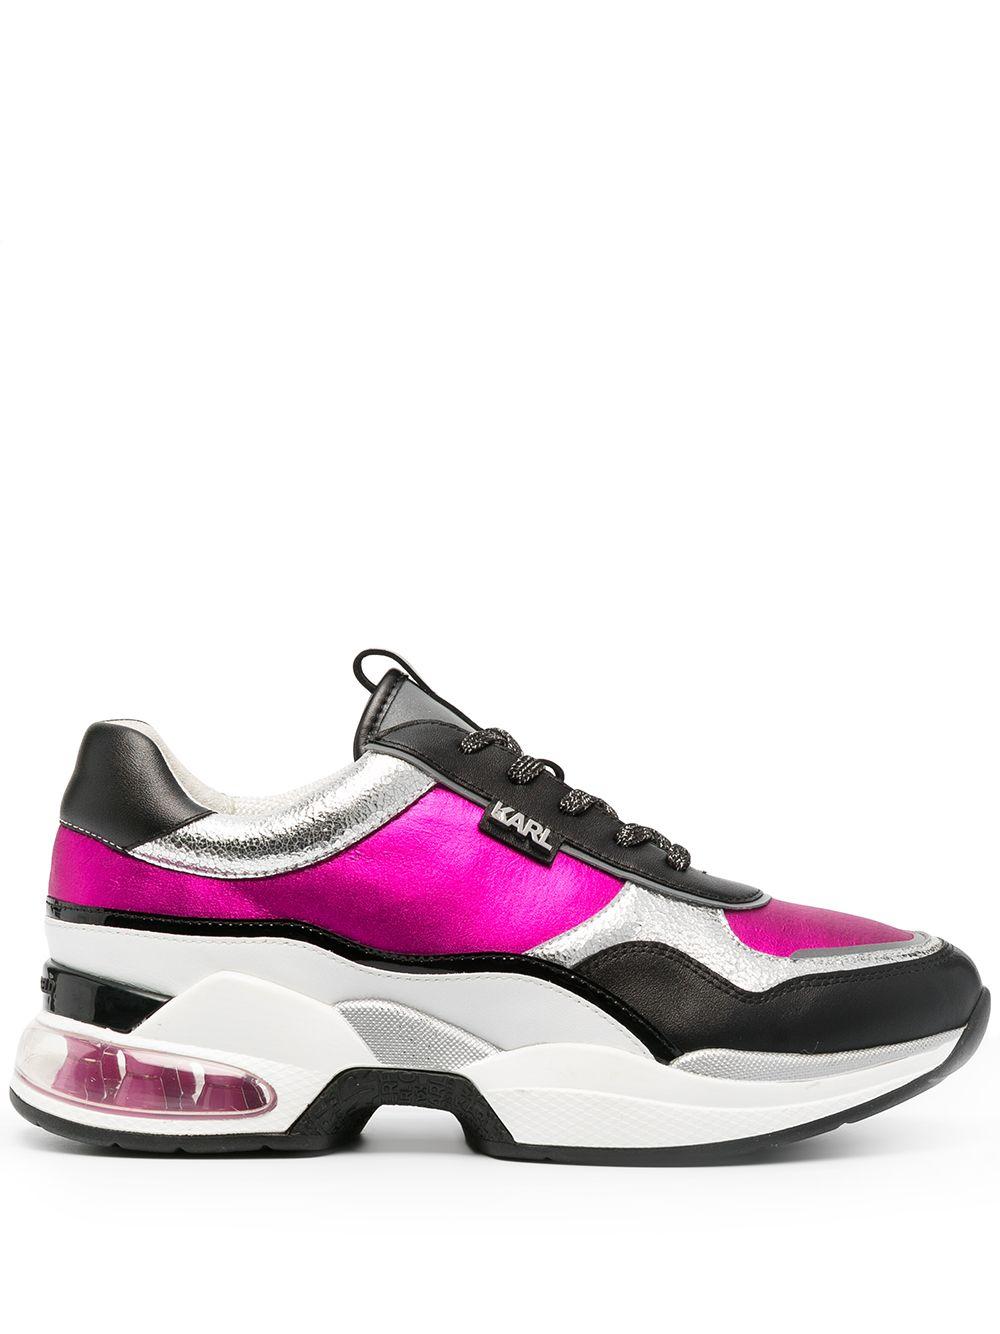 Karl Lagerfeld 'Ventura Lazare' Sneakers in Pink | Lyst AT